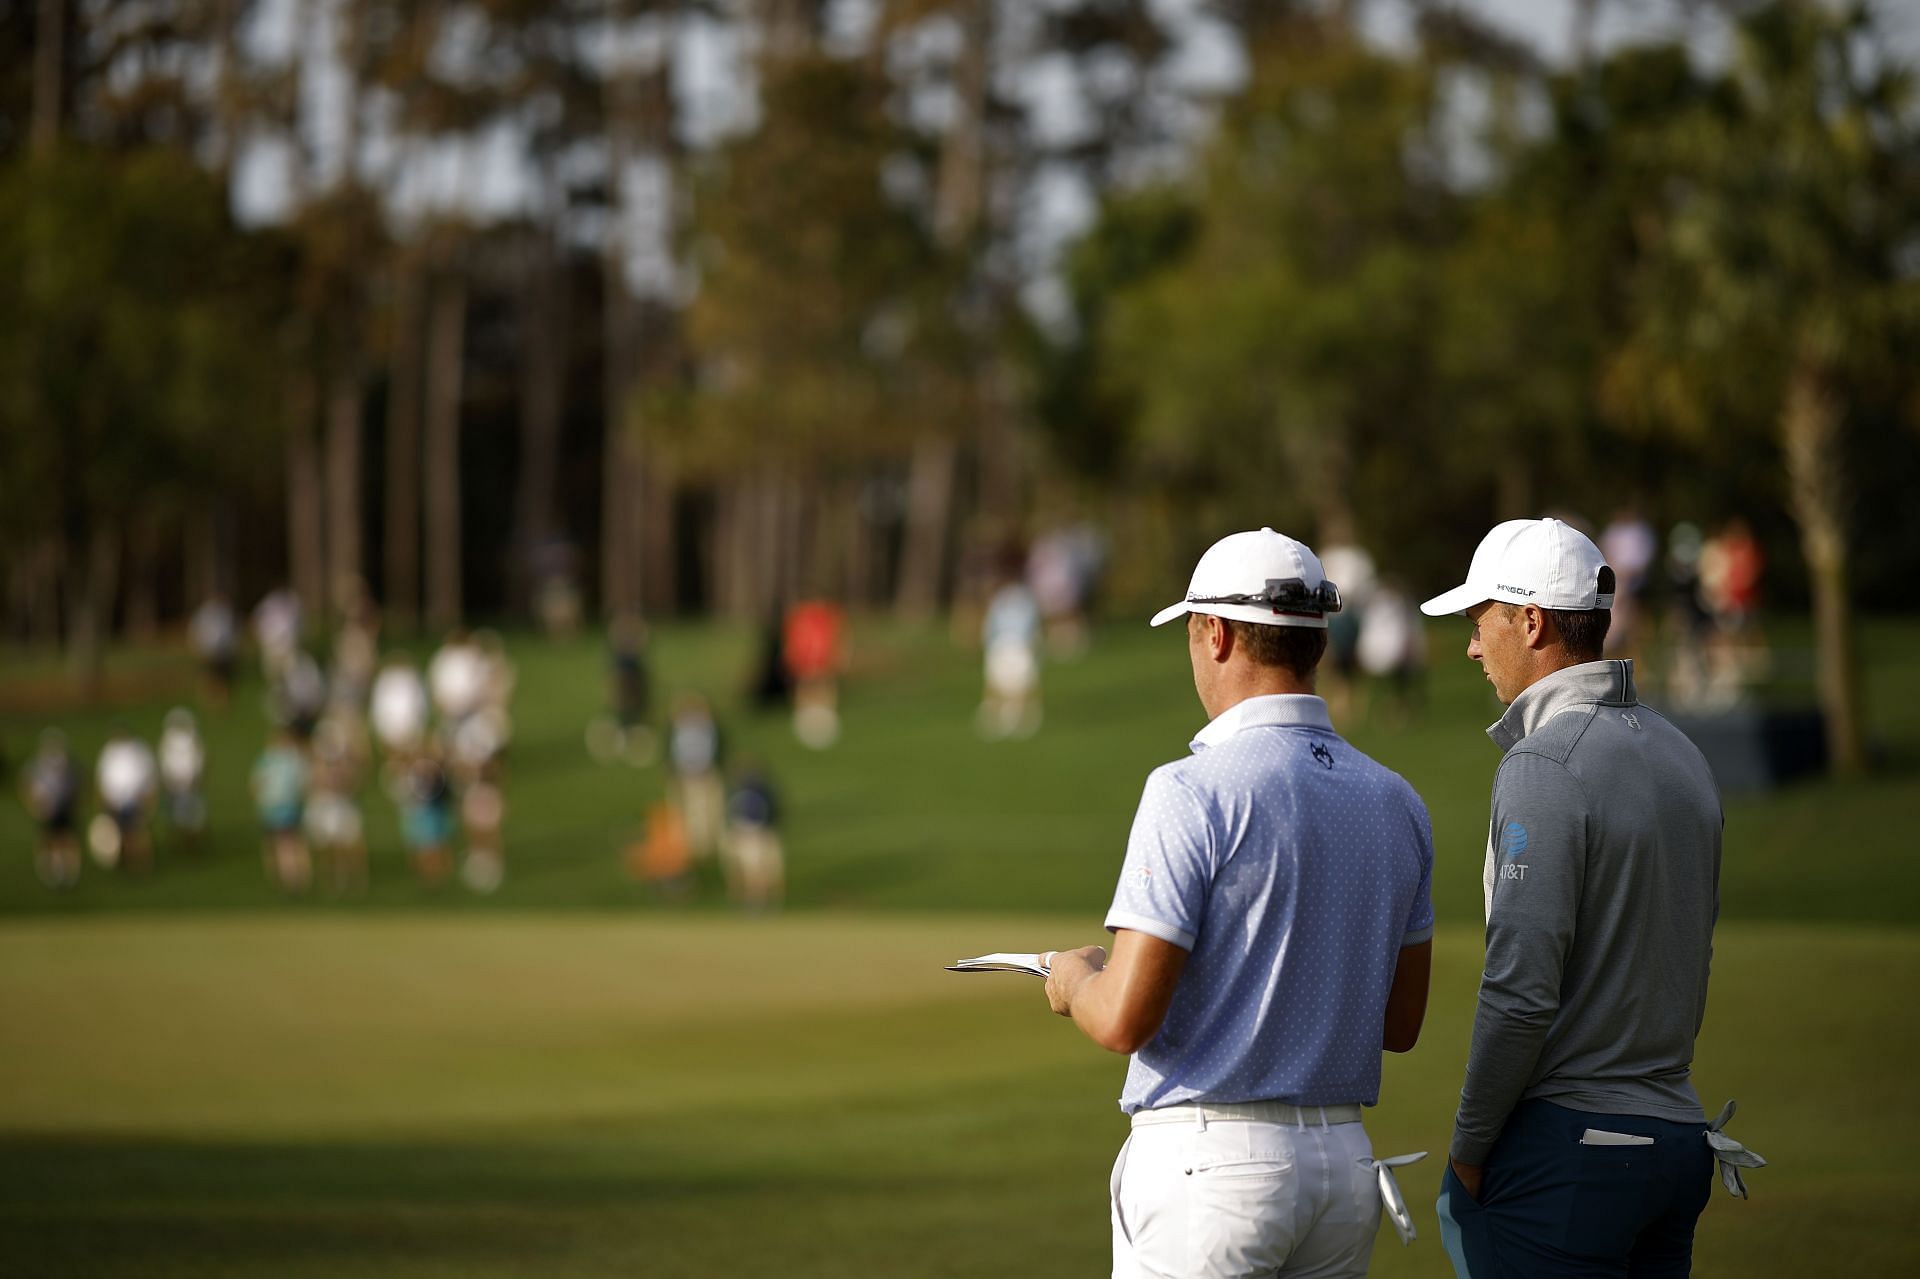 Justin Thomas and Jordan Spieth at THE PLAYERS Championship (via Getty Images)